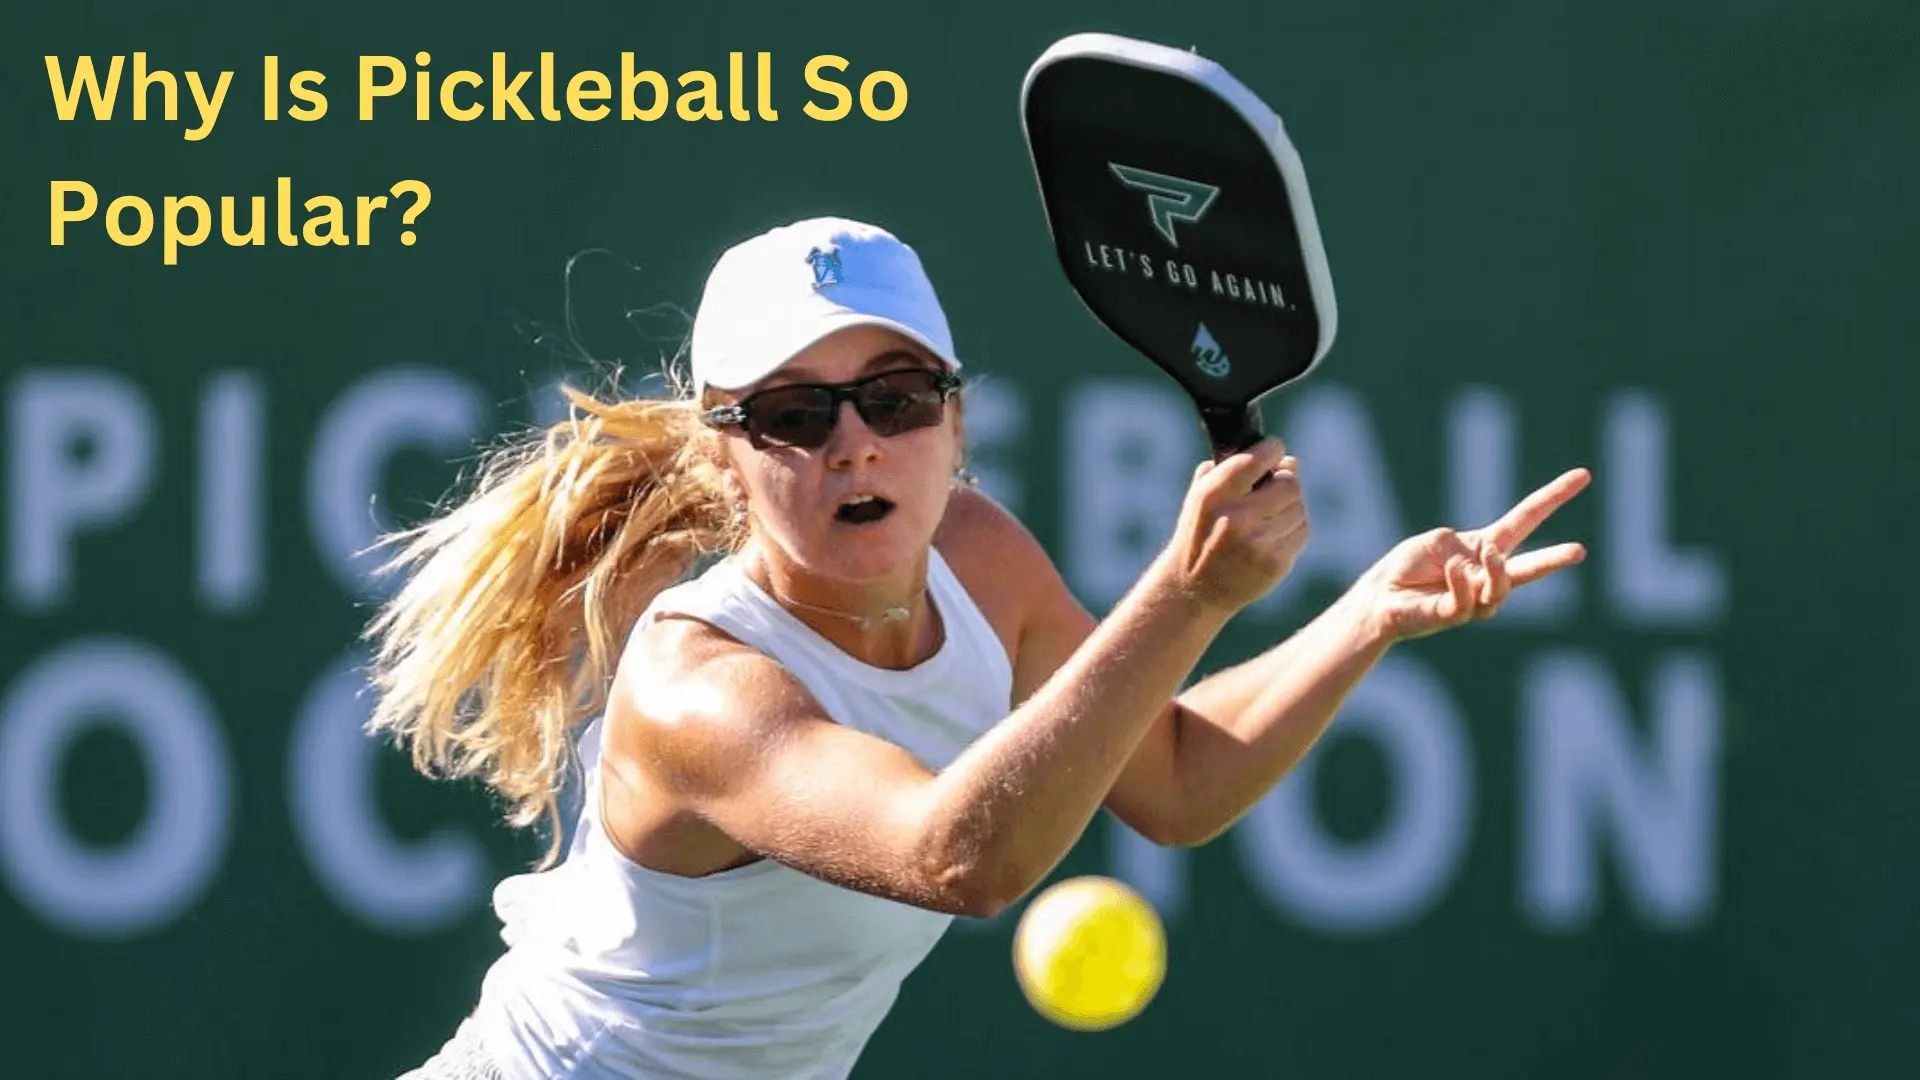 Why is pickleball so popular